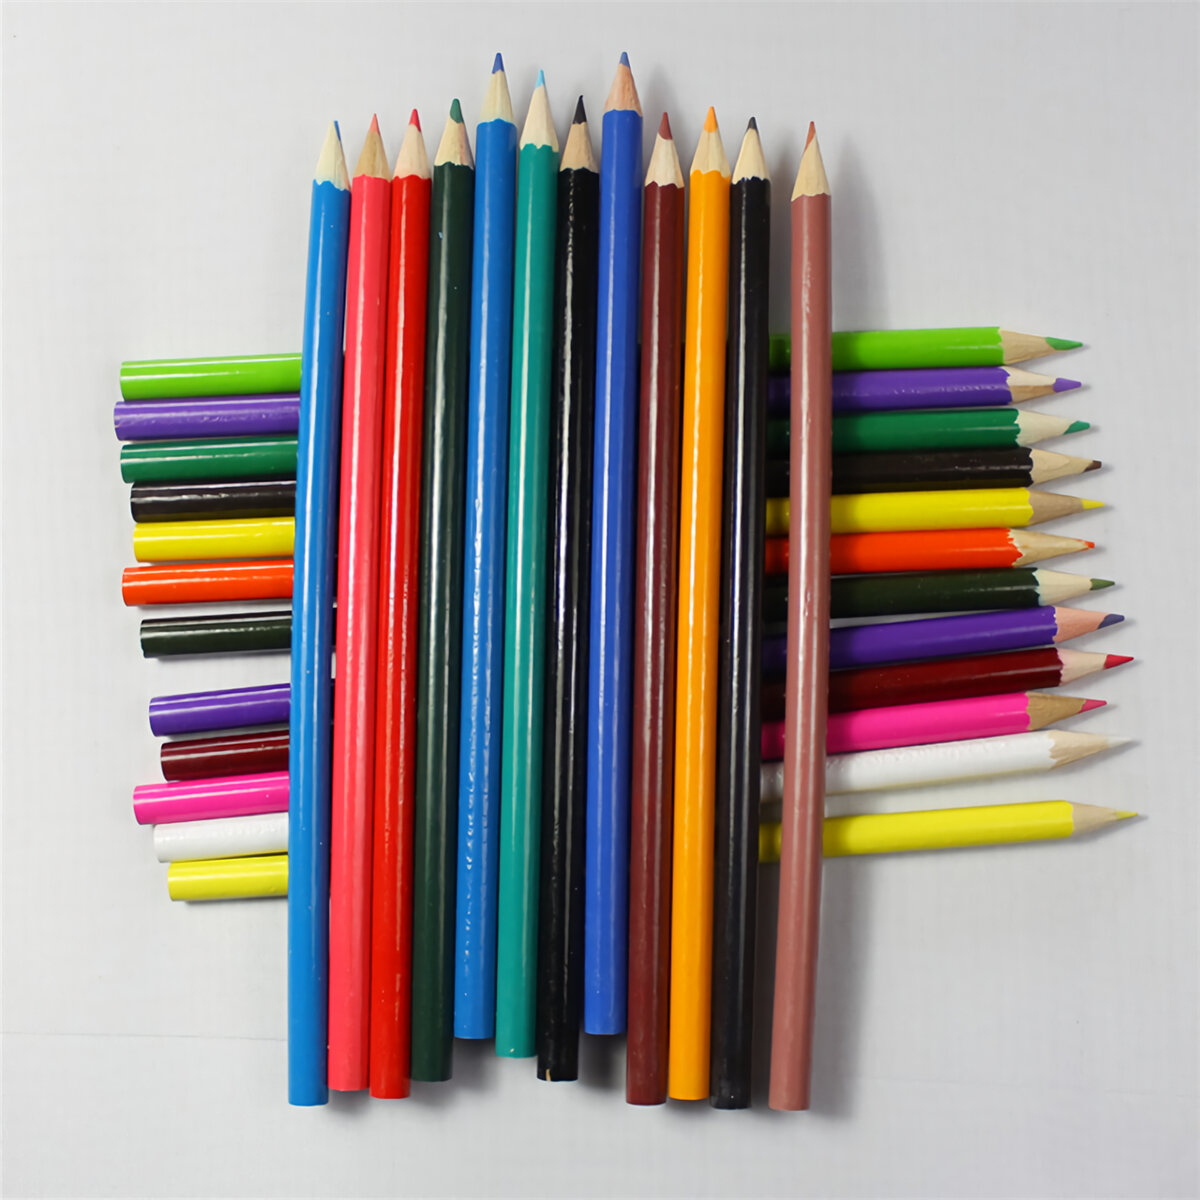 24-color Colored Pencils Wood Artist Painting Oil Color Pencil for School Drawing Sketch Art Supplie